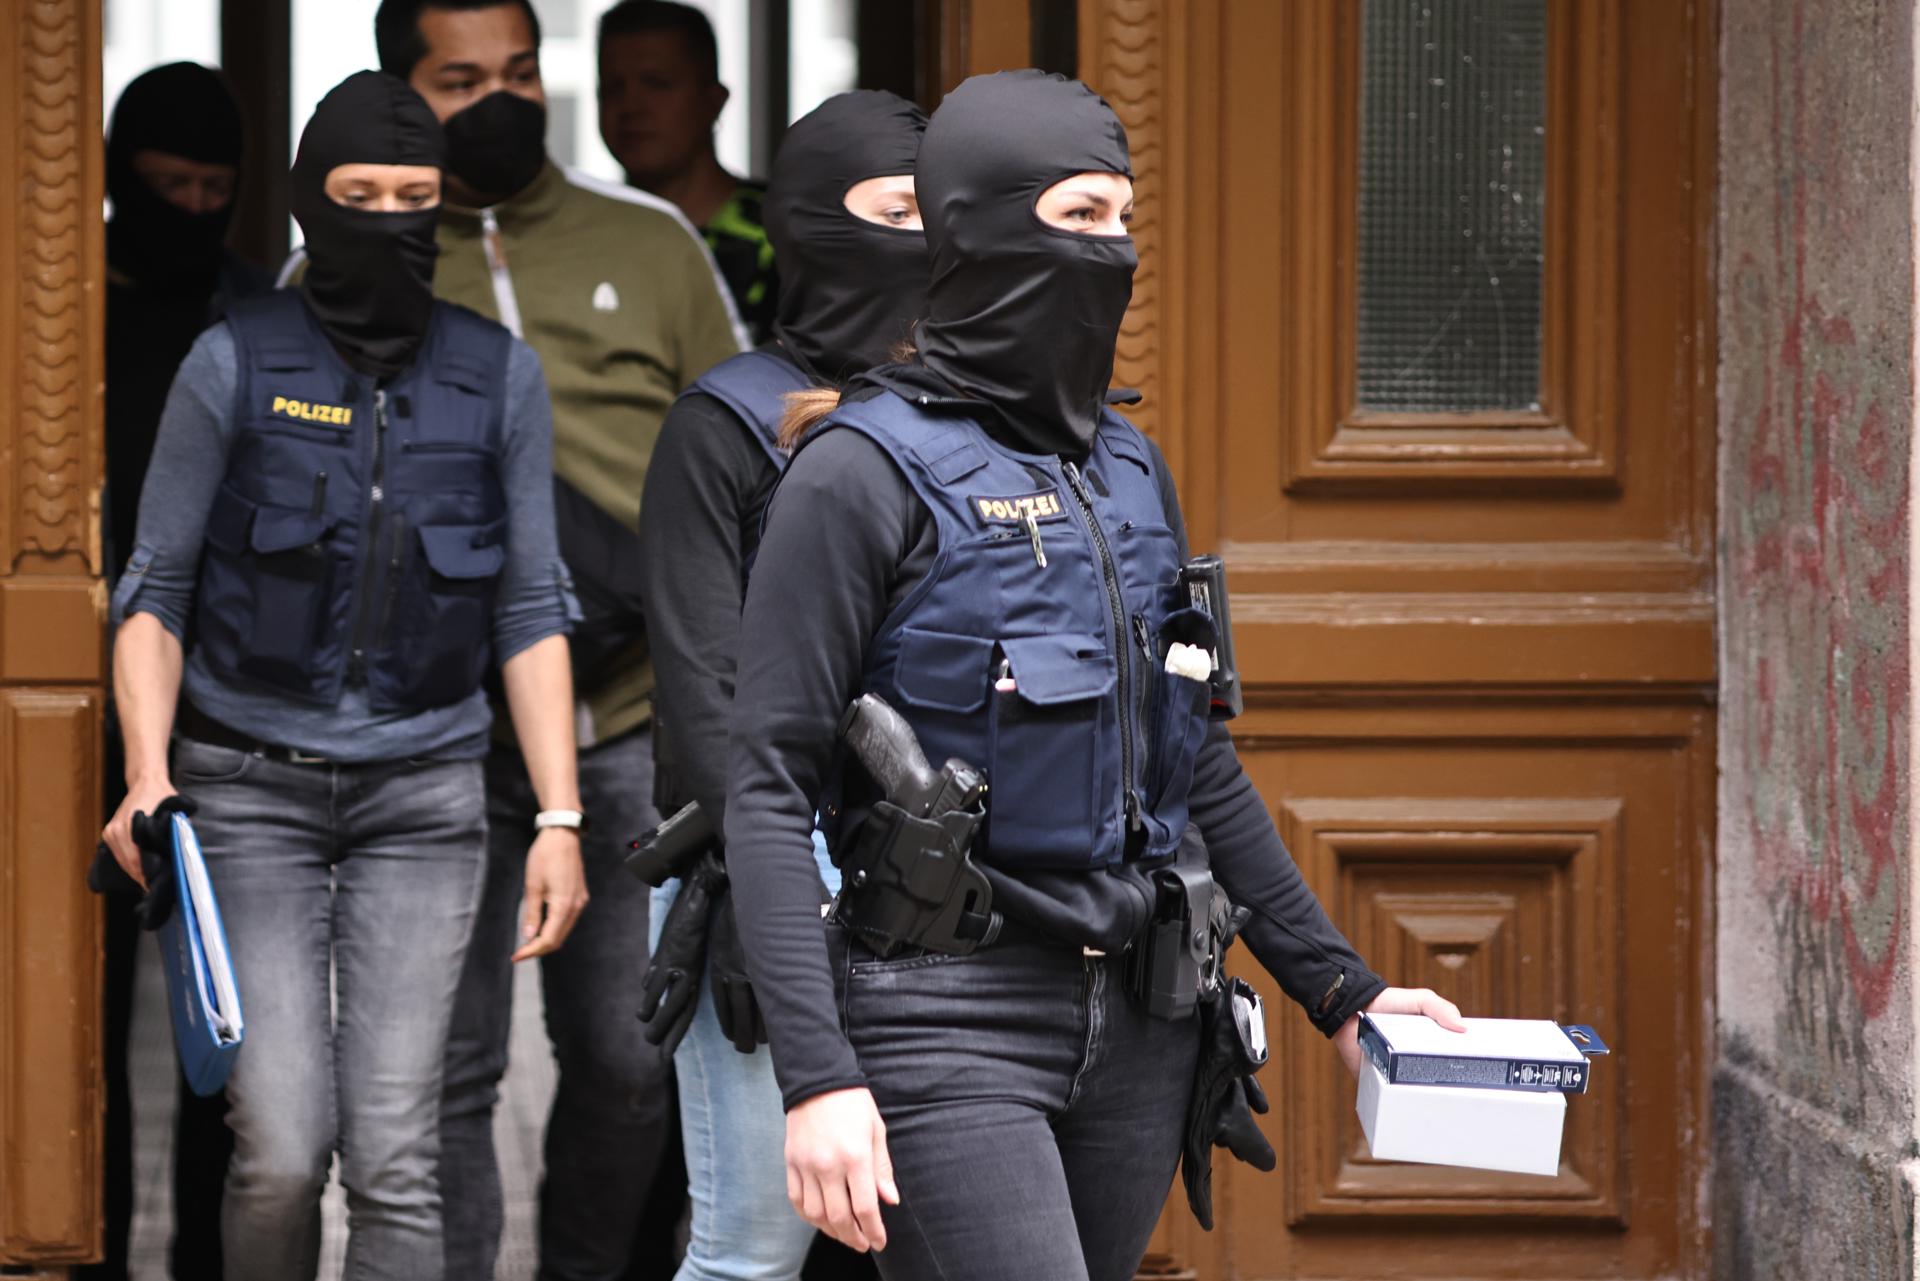 Police officers with face masks leave a residential building during a raid in Berlin, Germany, 24 May 2023. EFE/EPA/CLEMENS BILAN